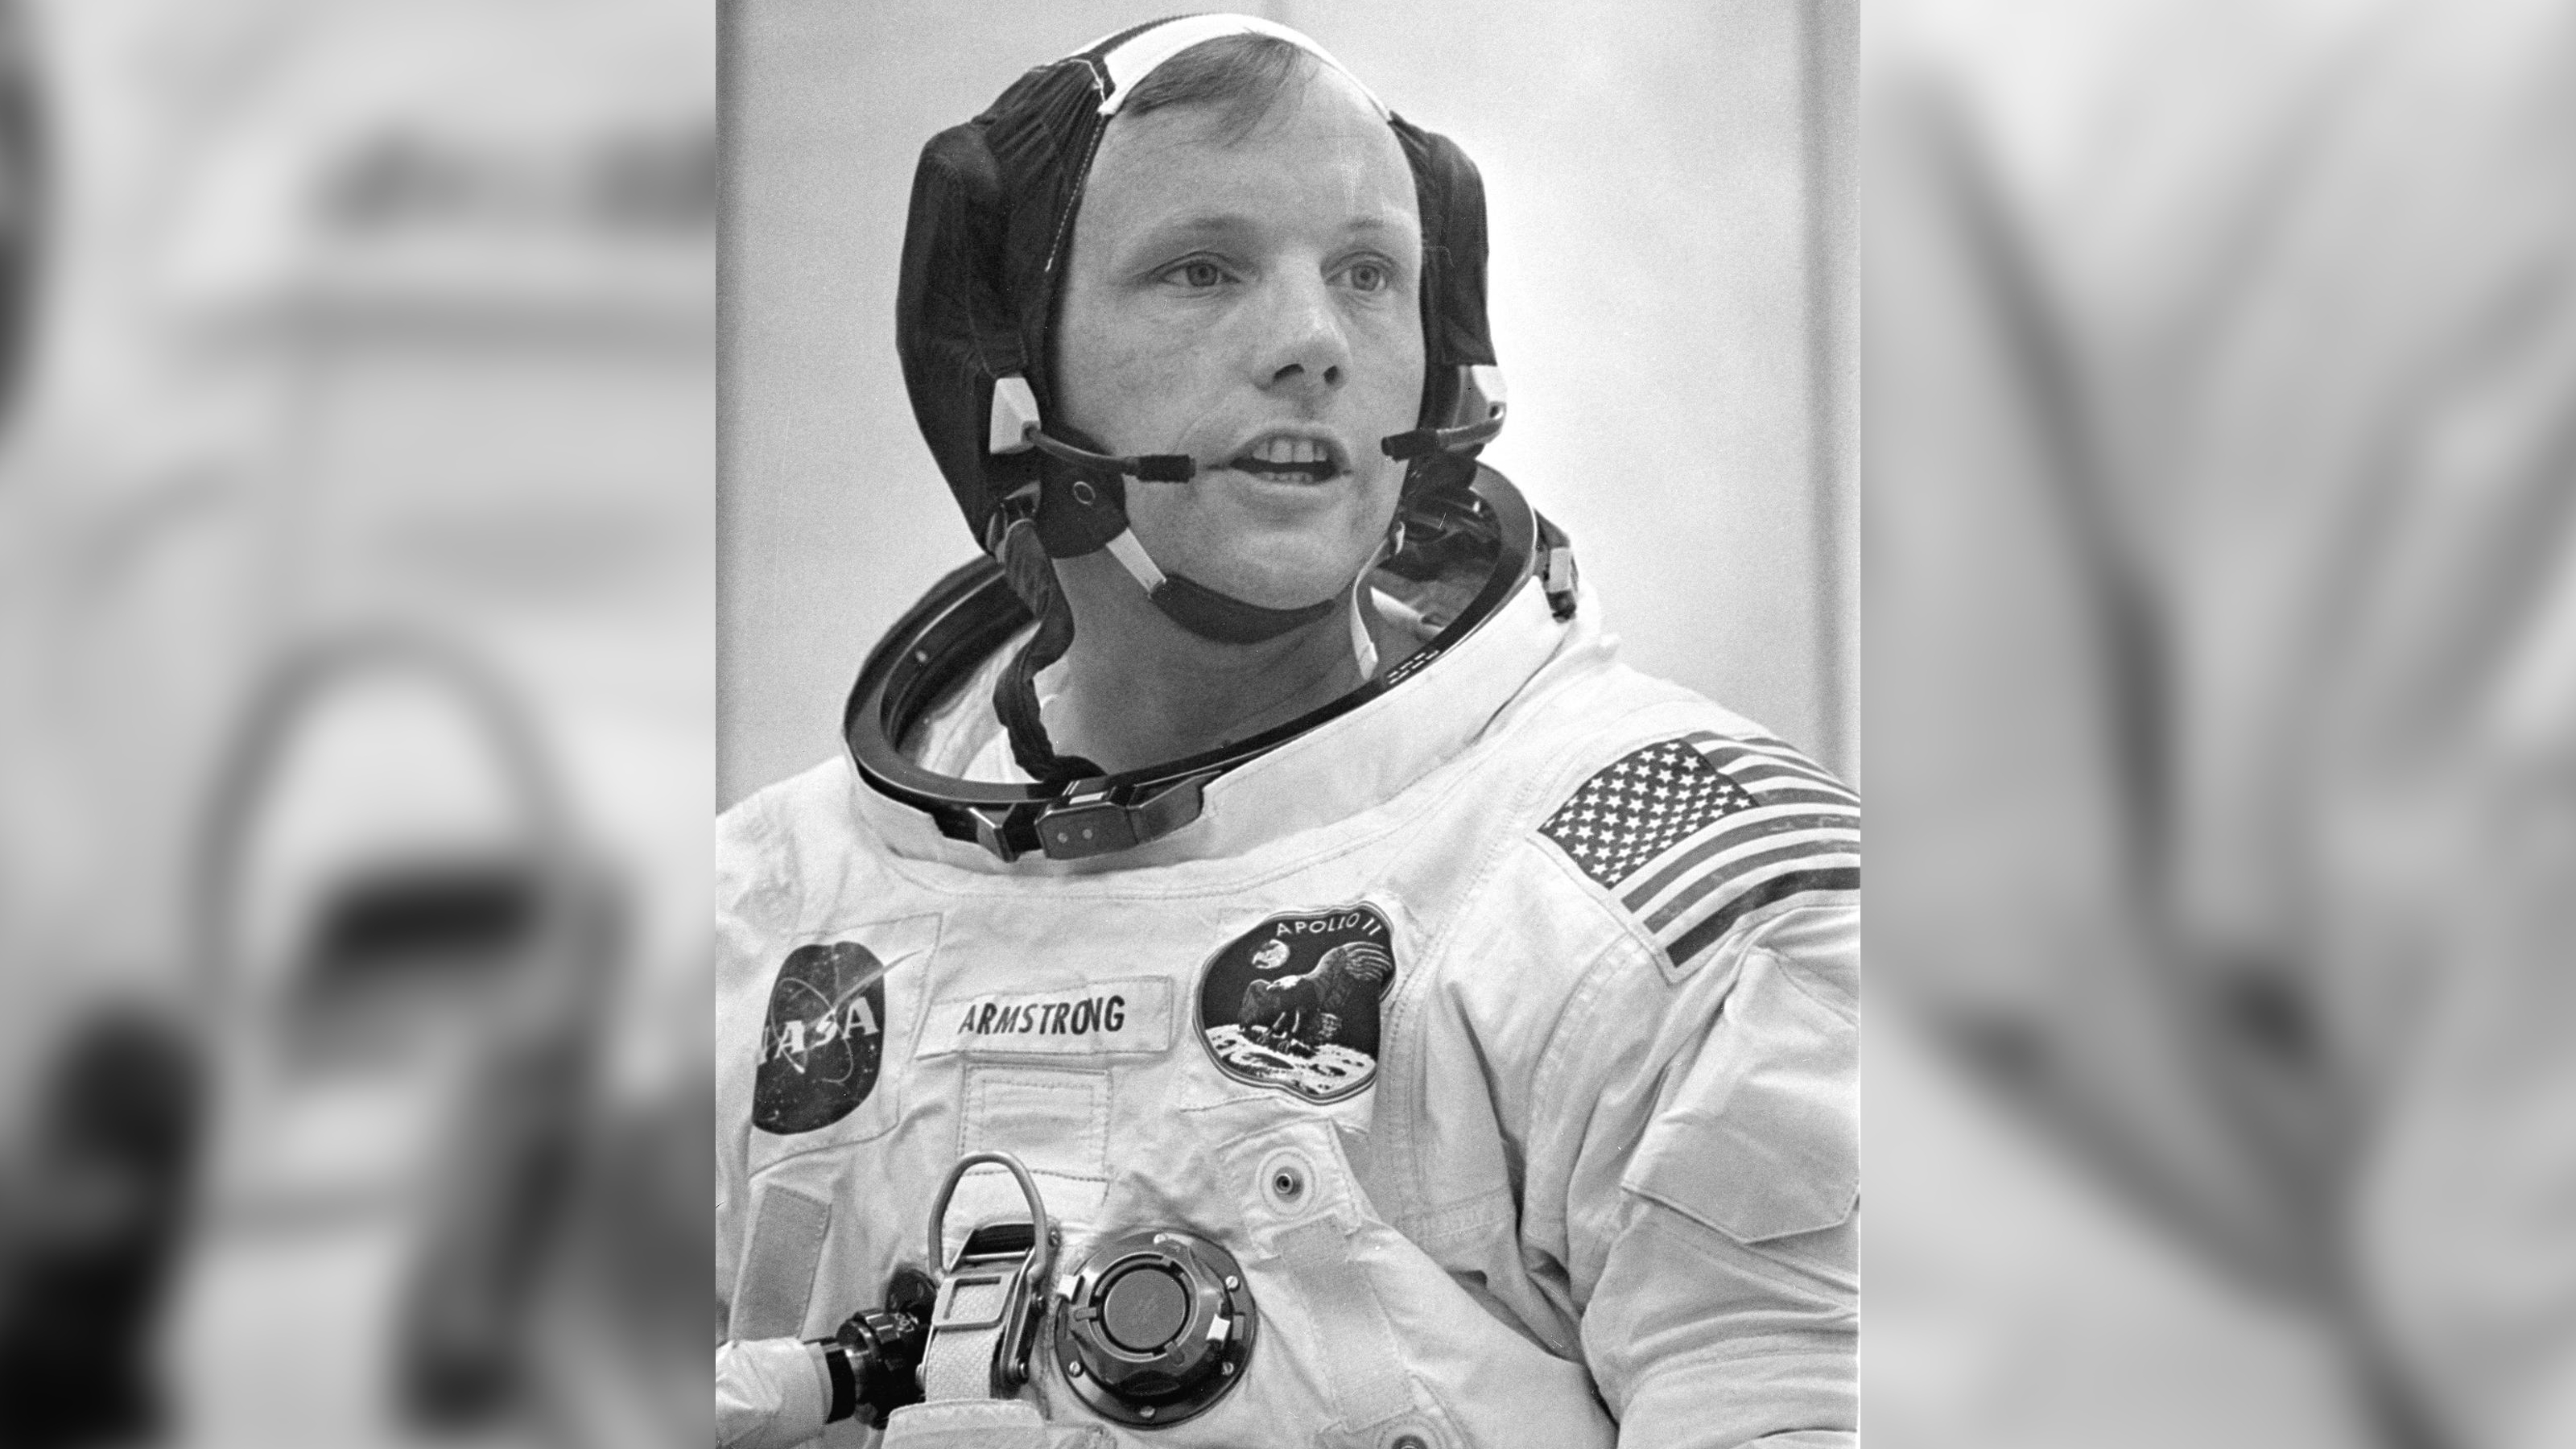 neil armstrong first man on the moon